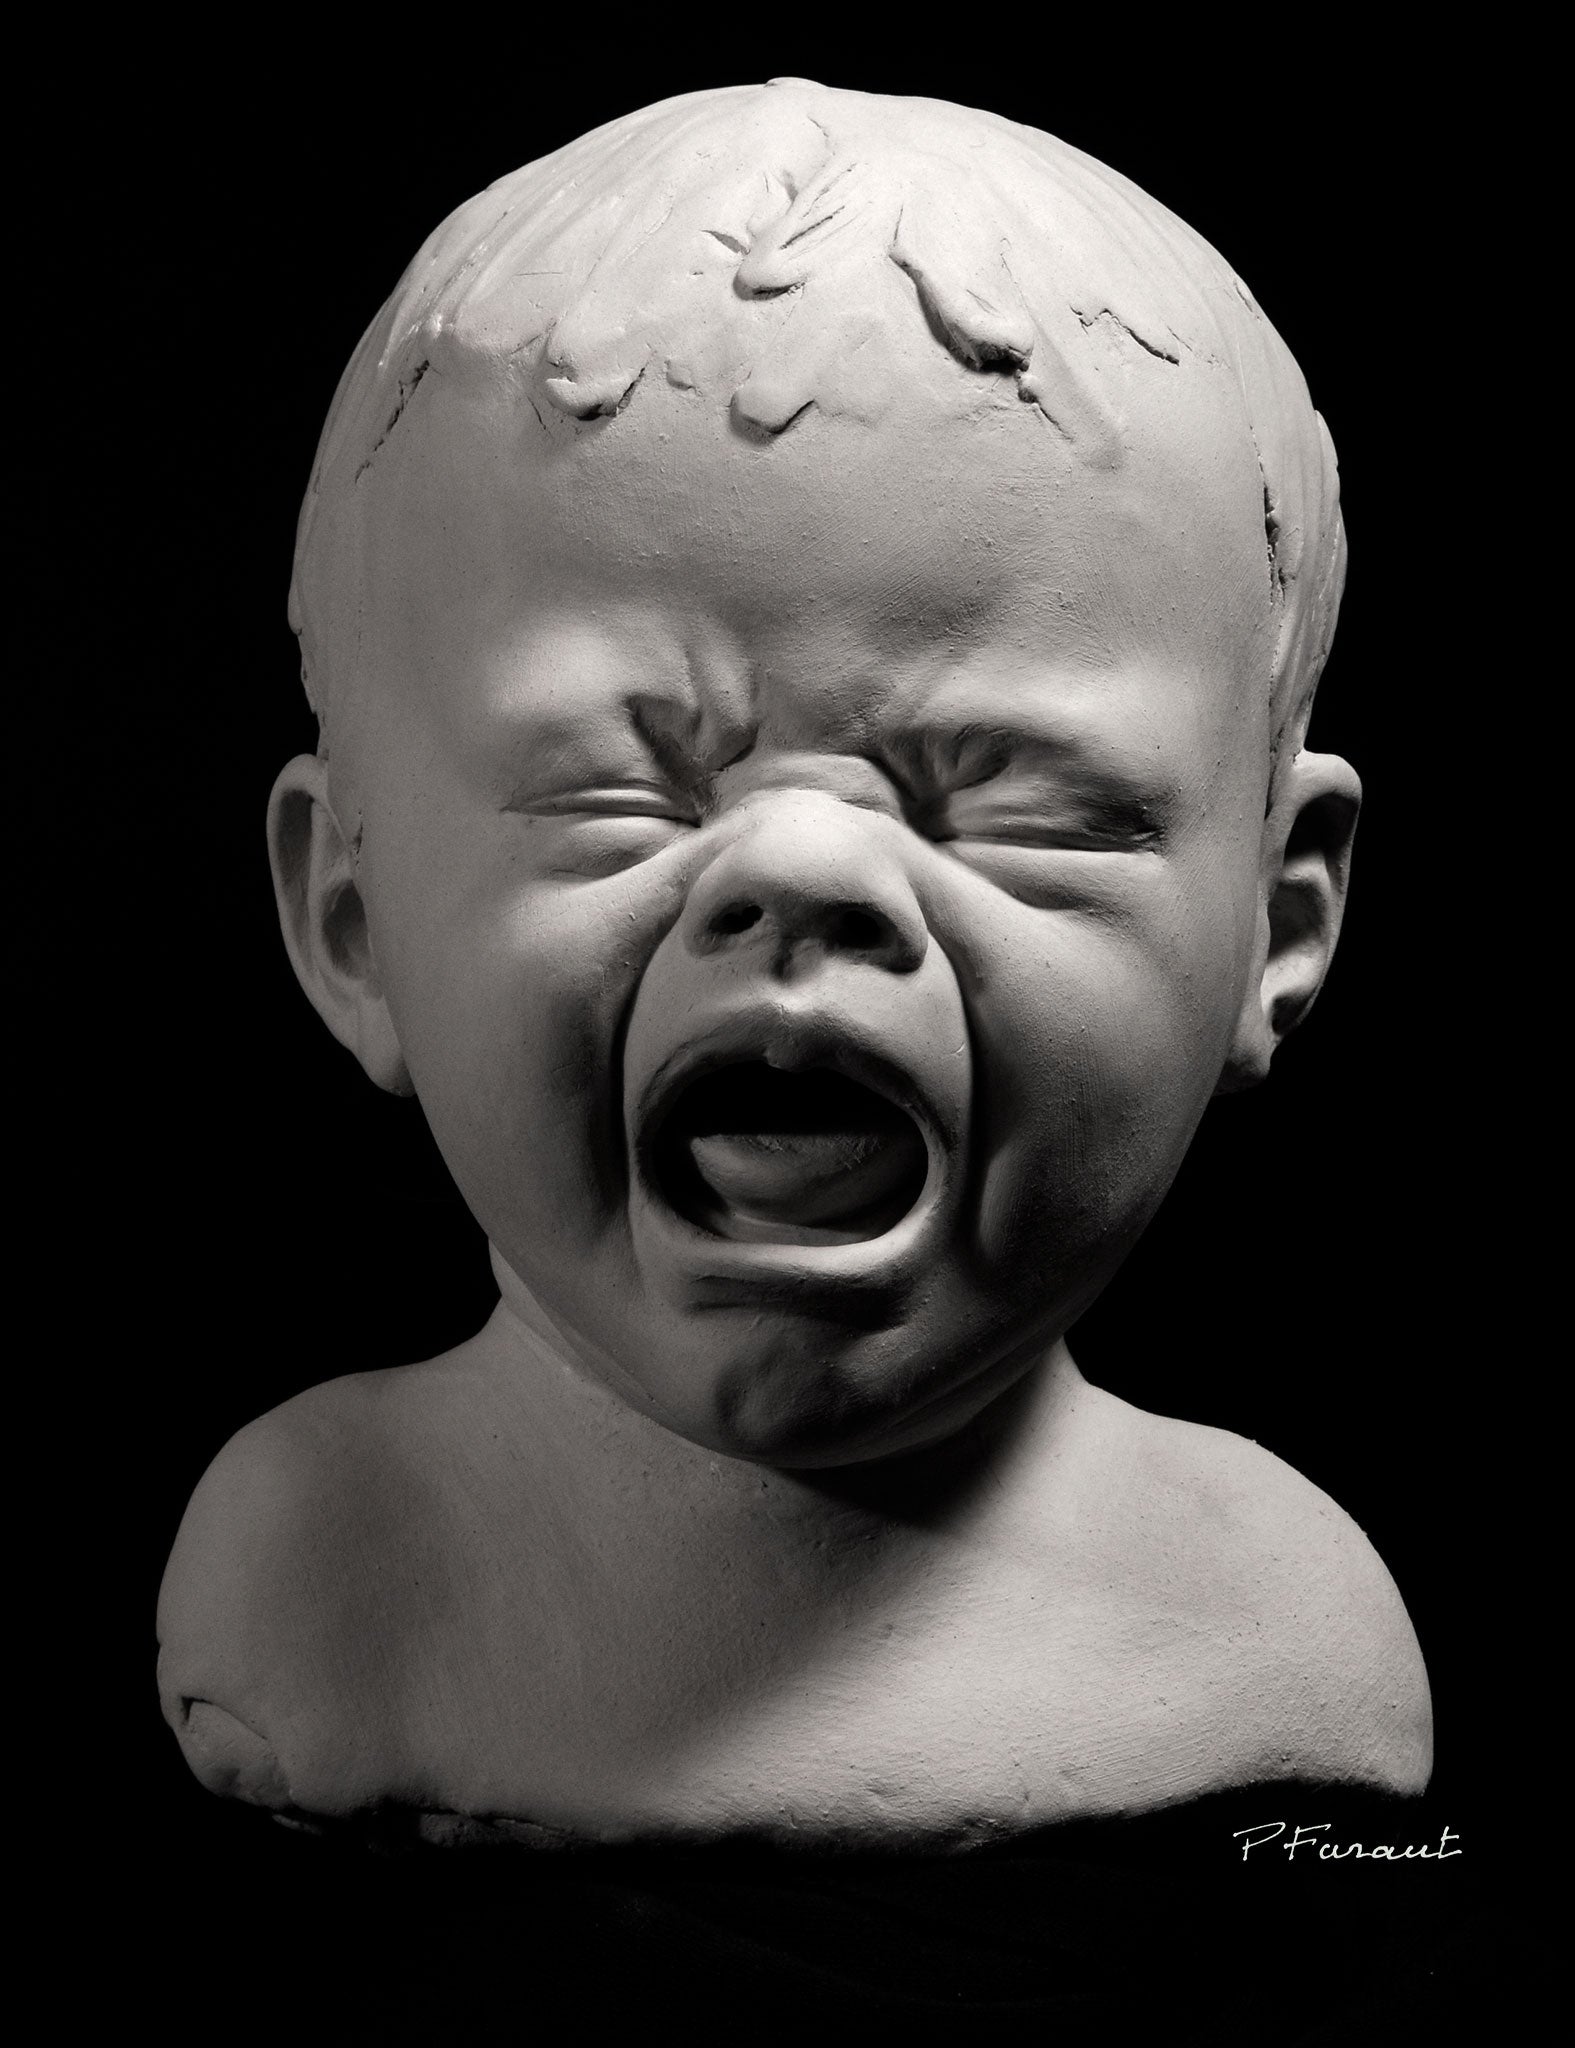 clay portrait of a closed-eyed crying baby by Philippe Faraut